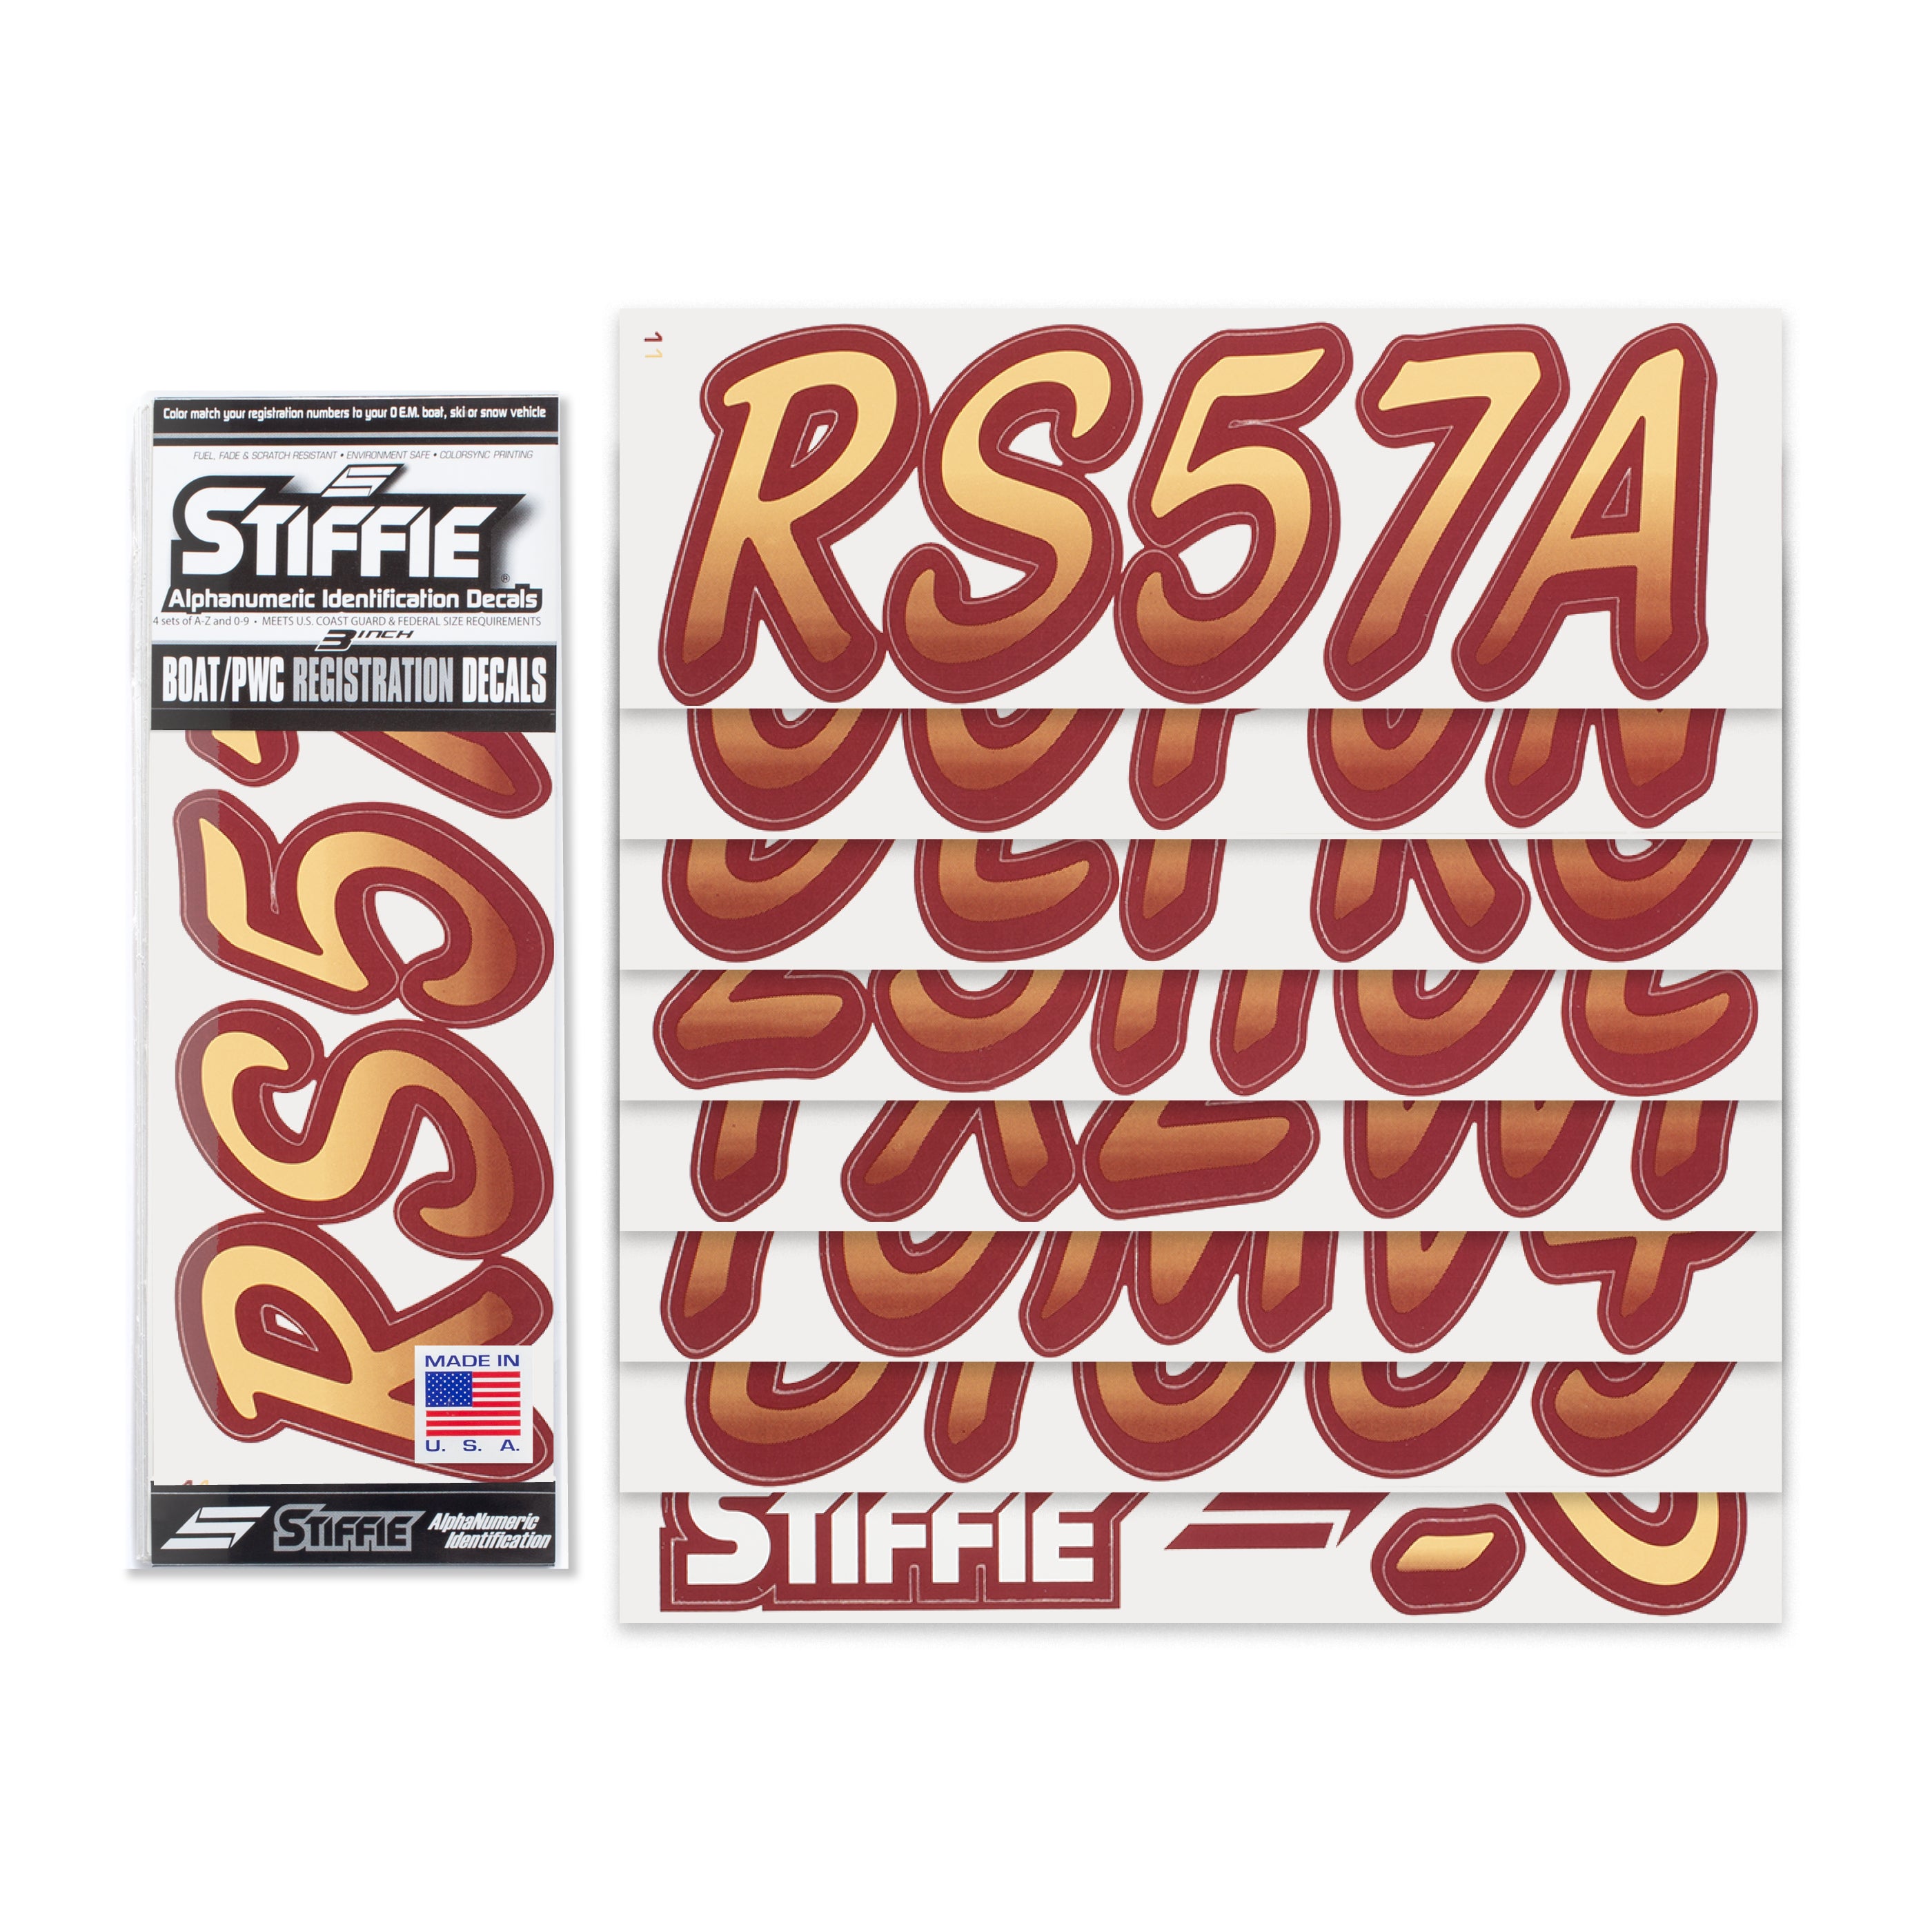 Stiffie Whipline Tan/Burgundy 3" Alpha-Numeric Registration Identification Numbers Stickers Decals for Boats & Personal Watercraft